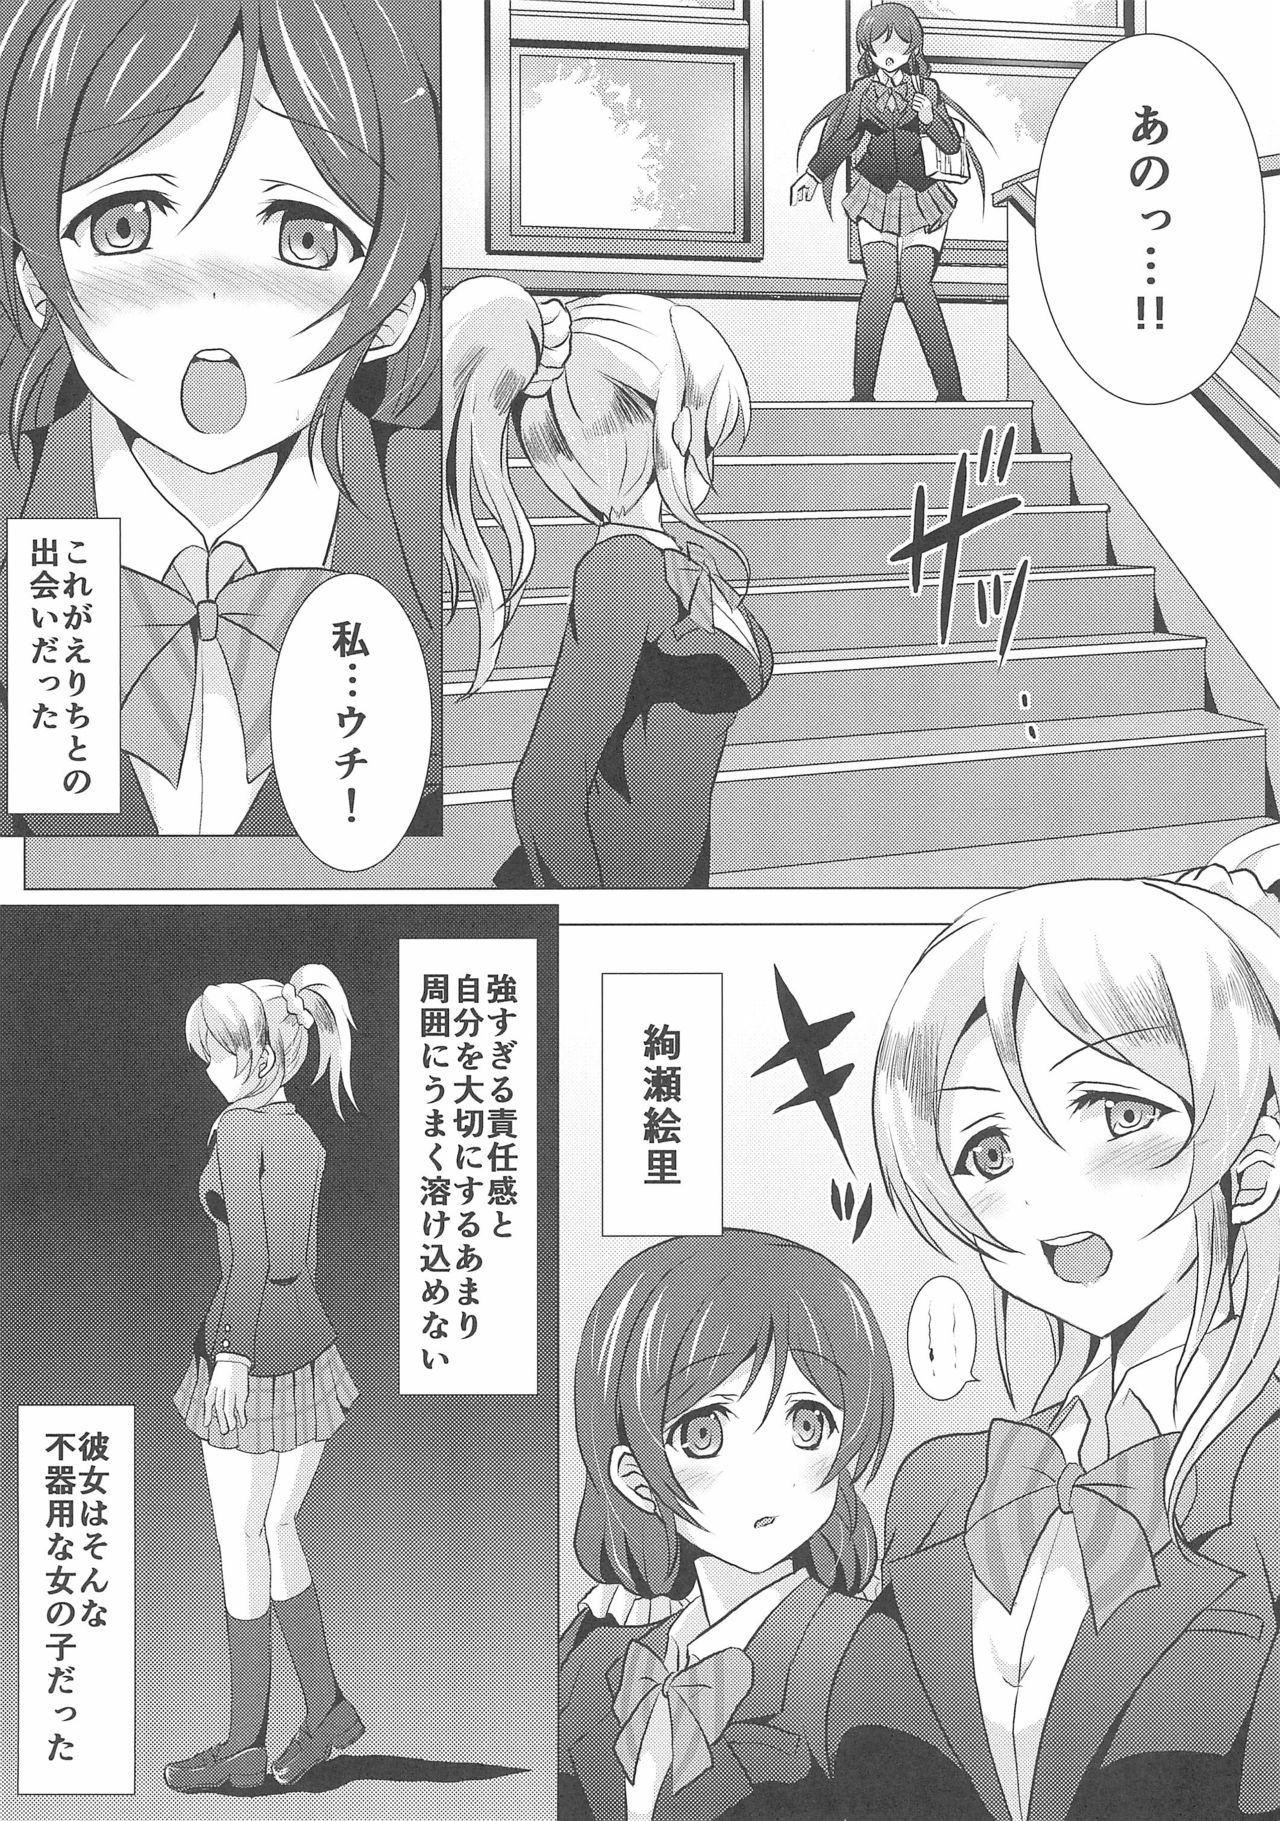 Hard Core Porn Loneliest Princess - Love live All Natural - Page 5